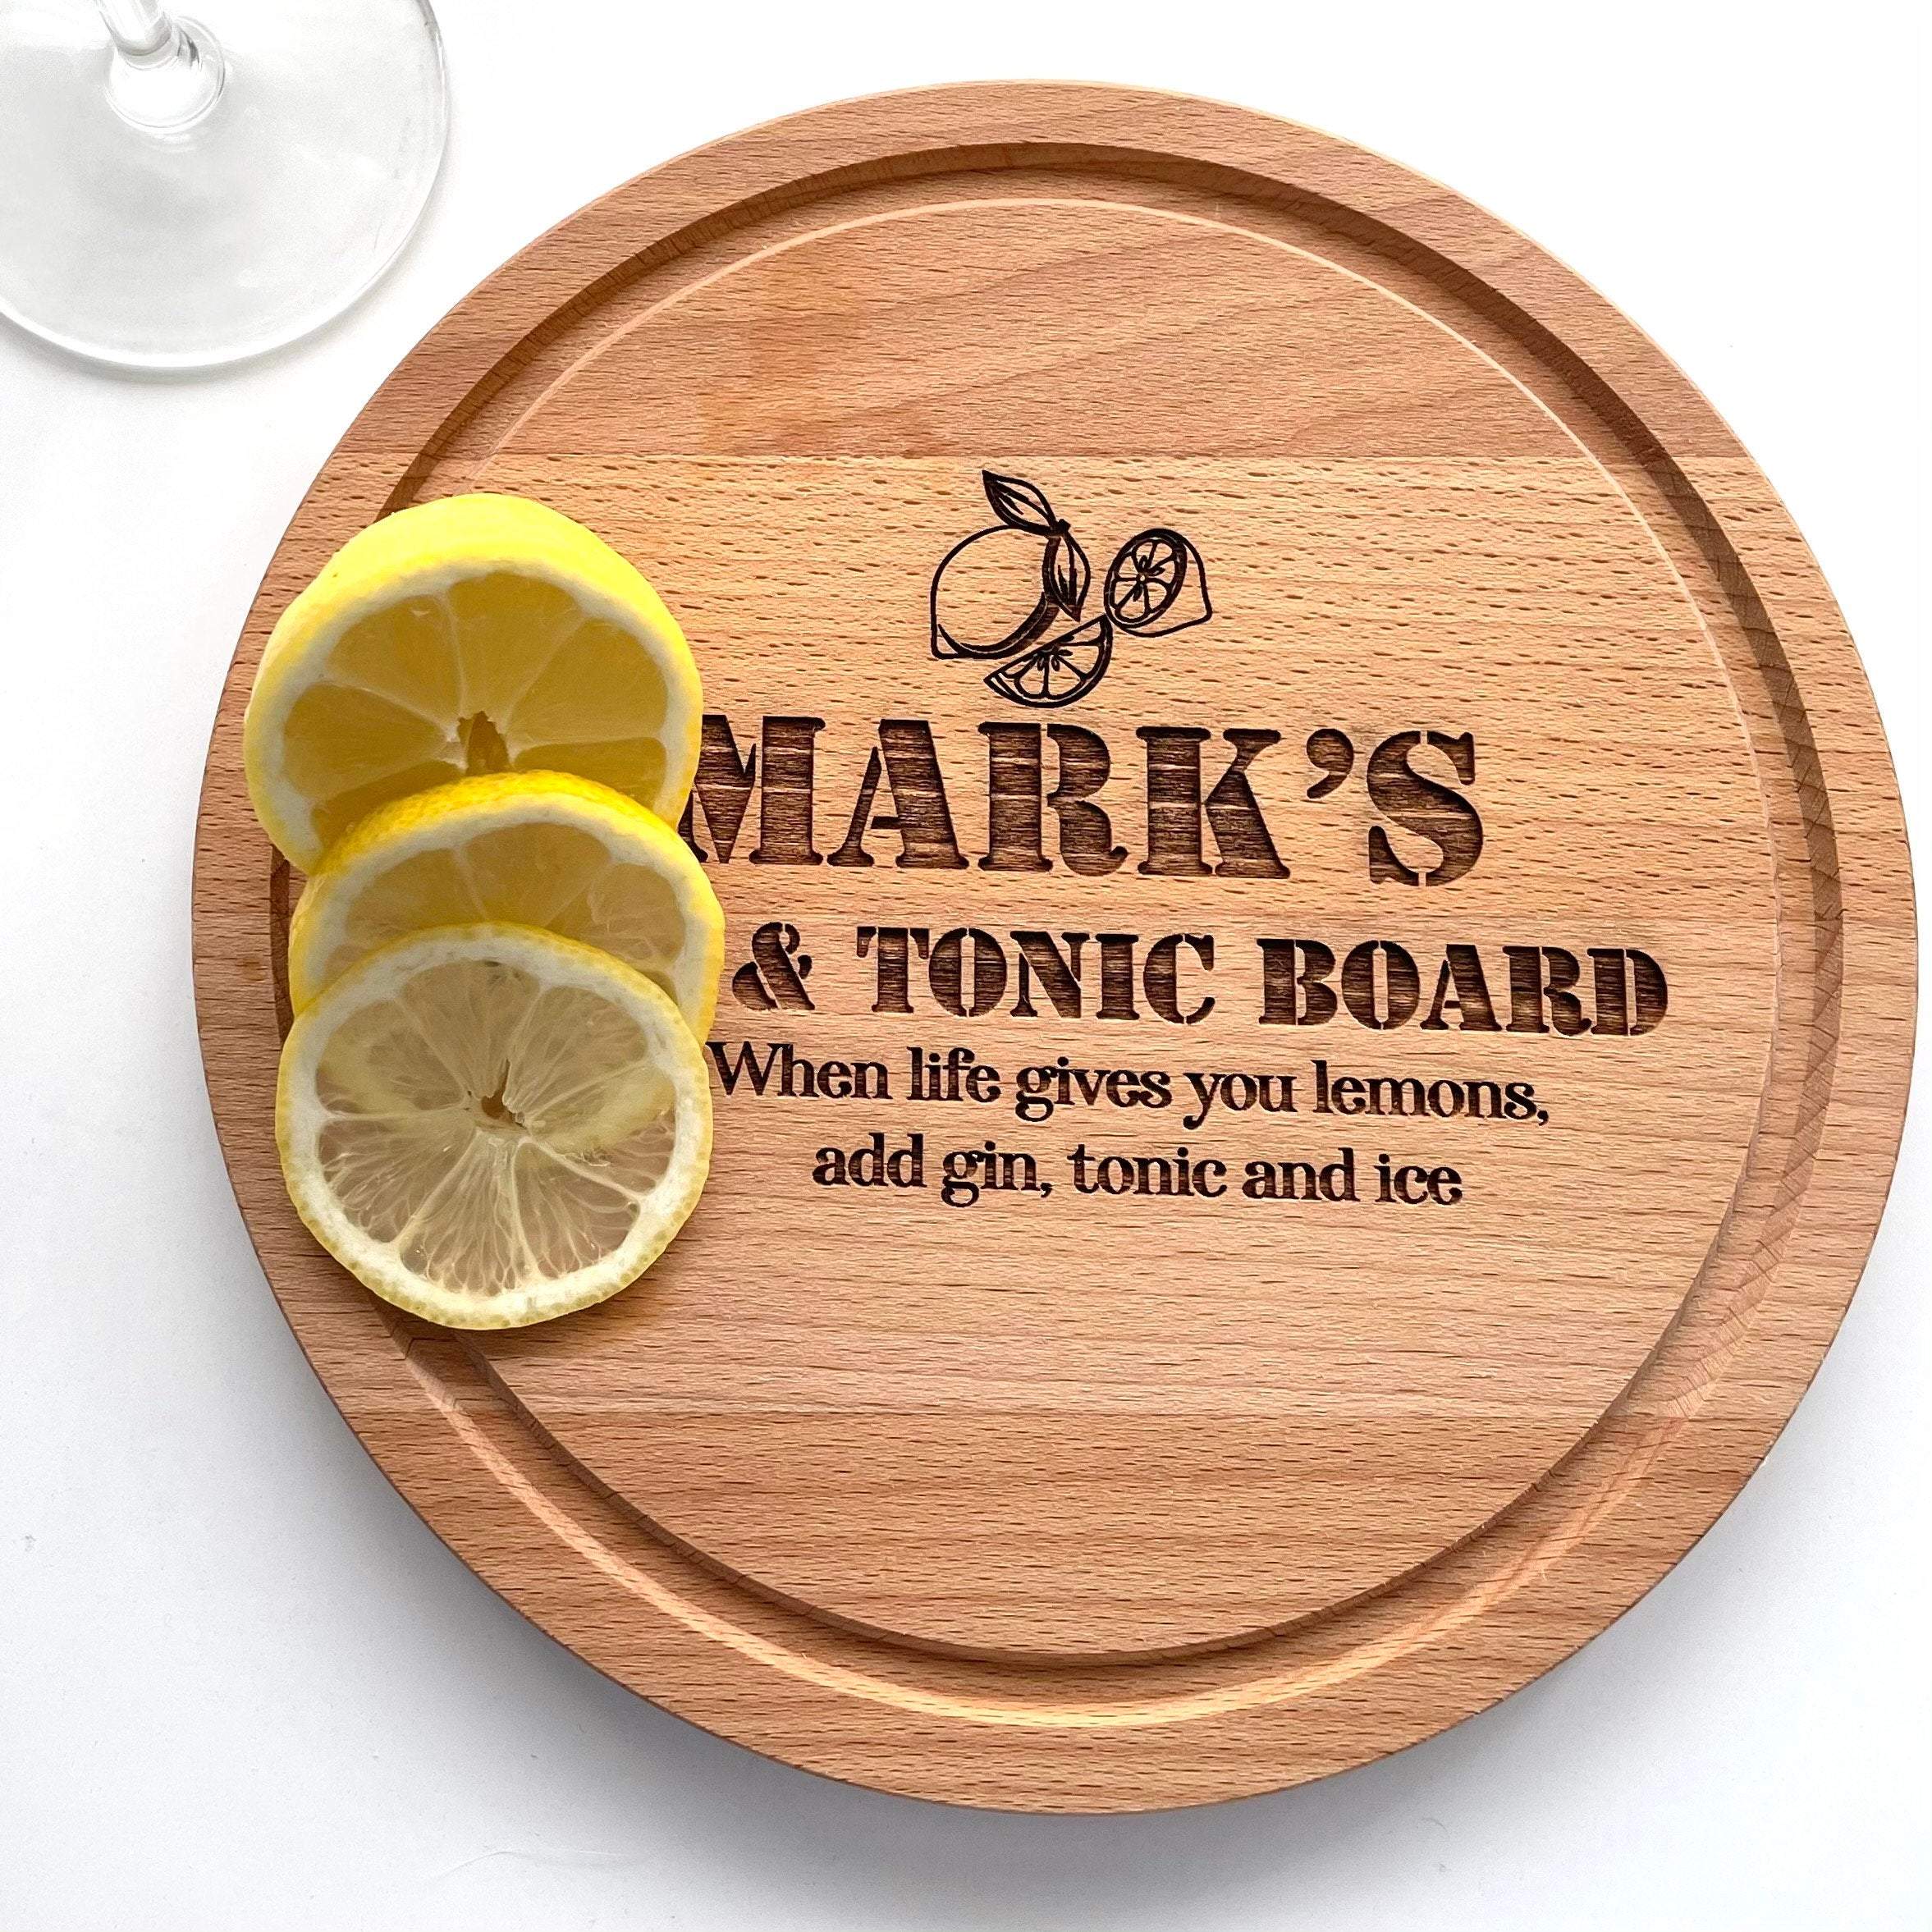 Personalised name engraved gin tonic board, Gin and tonic gift, Gift for birthday, new home gift